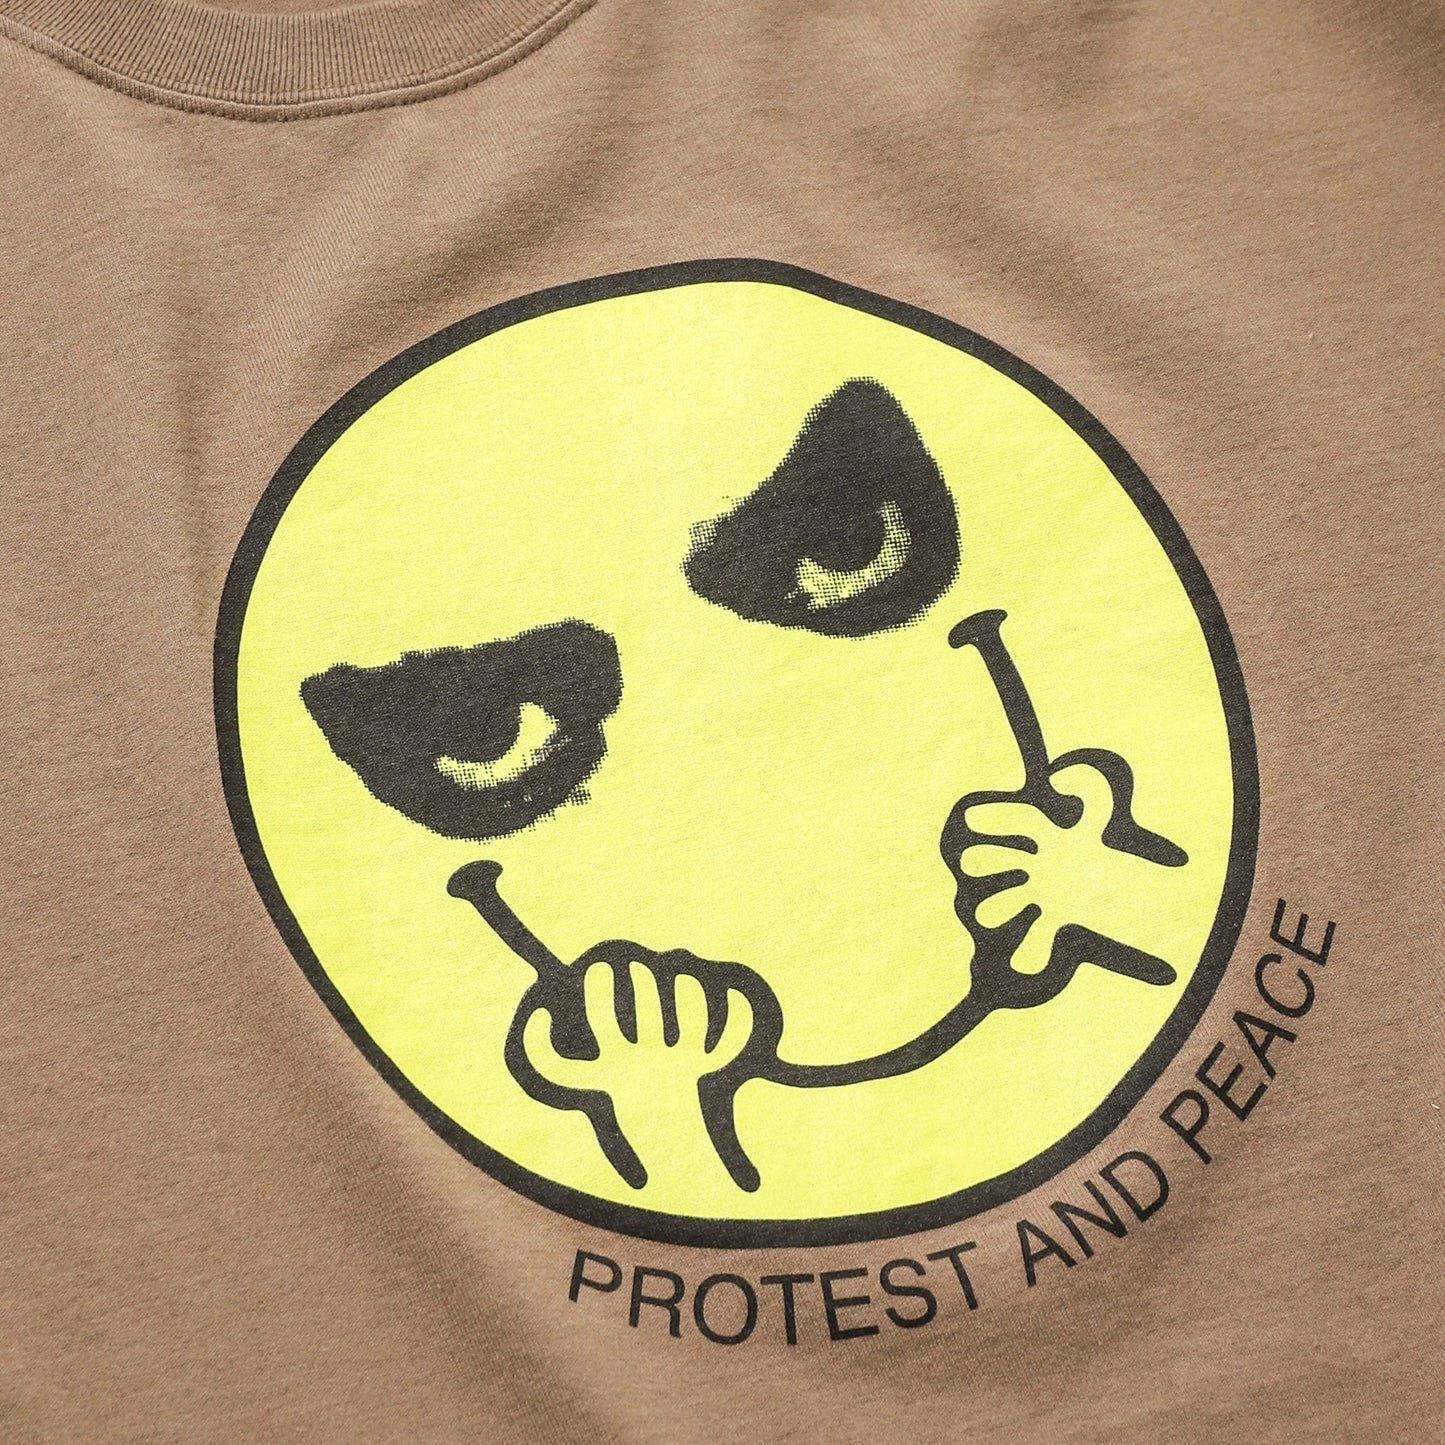 TEE PROTEST AND PEACE